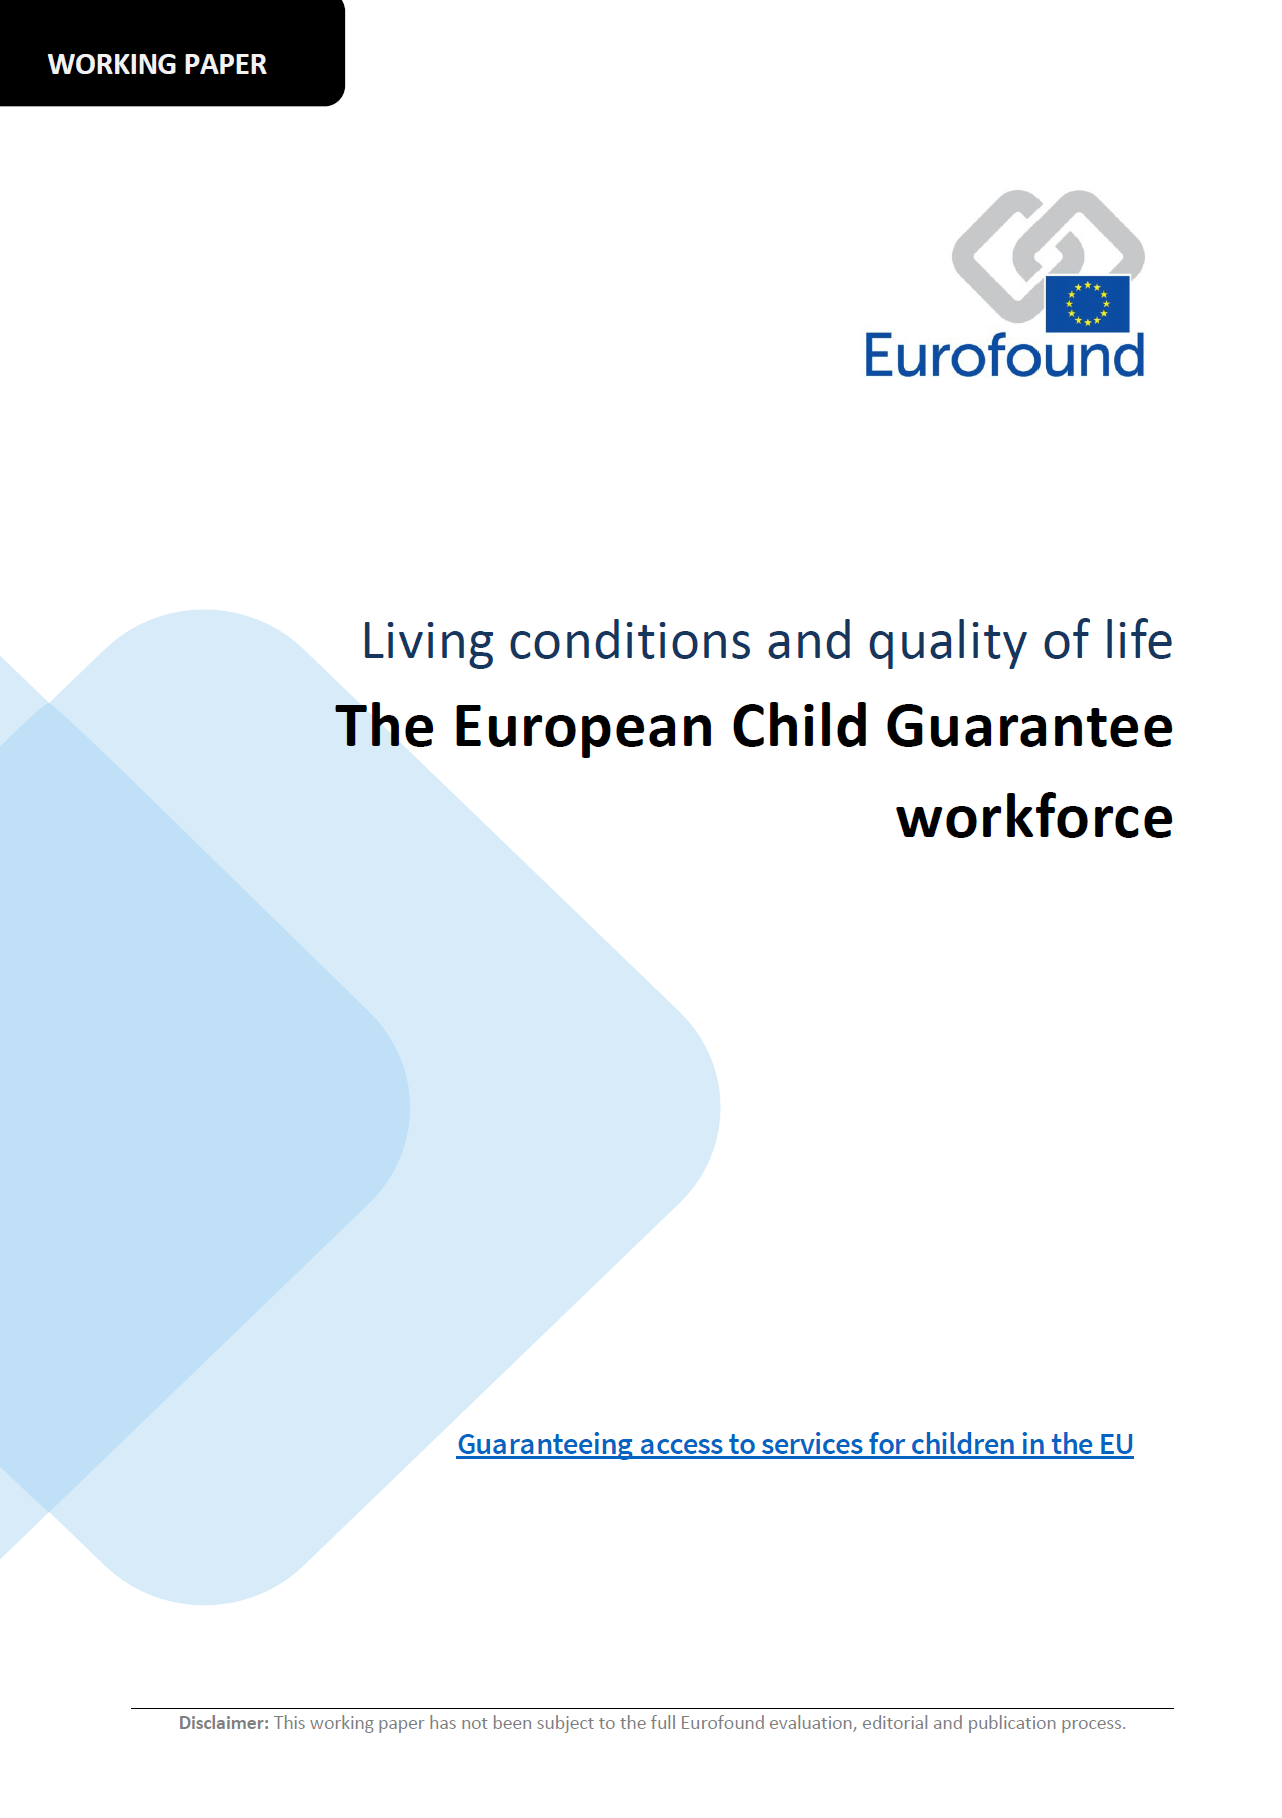 Living conditions and quality of life. The European Child Guarantee workforce